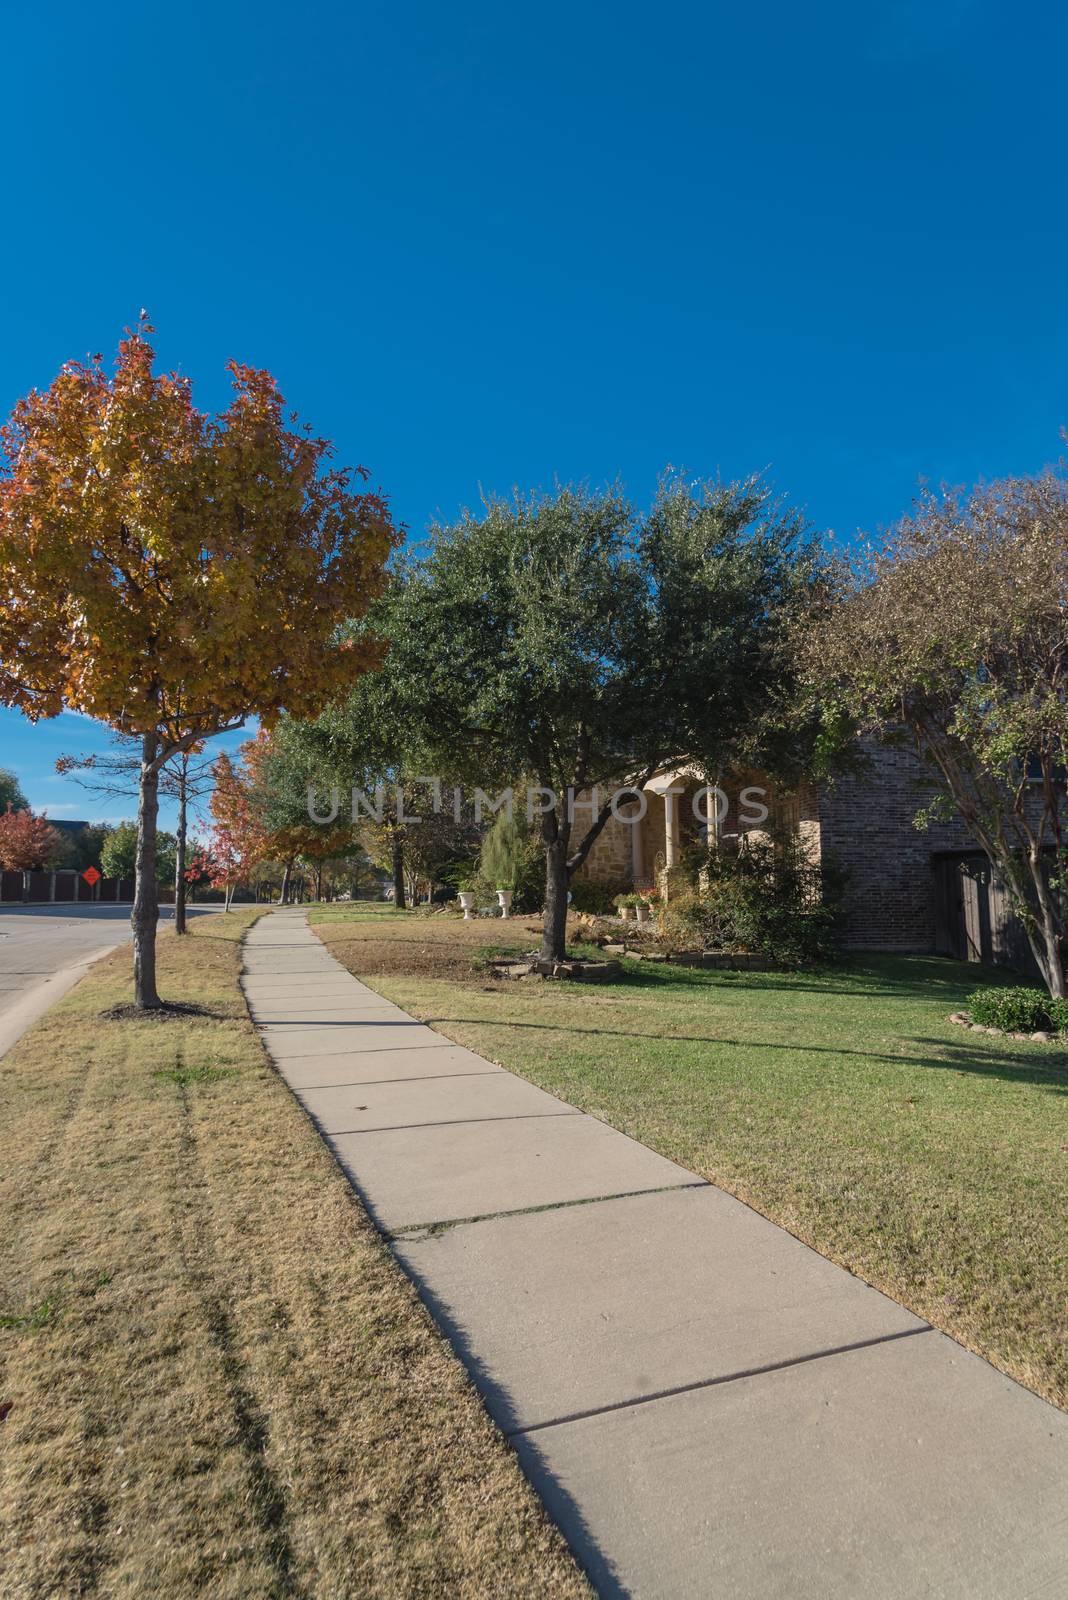 Typical sidewalk pathway in residential neighborhood suburban Dallas, Texas, America in autumn with colorful fall foliage. Quiet street in new development subdivision.